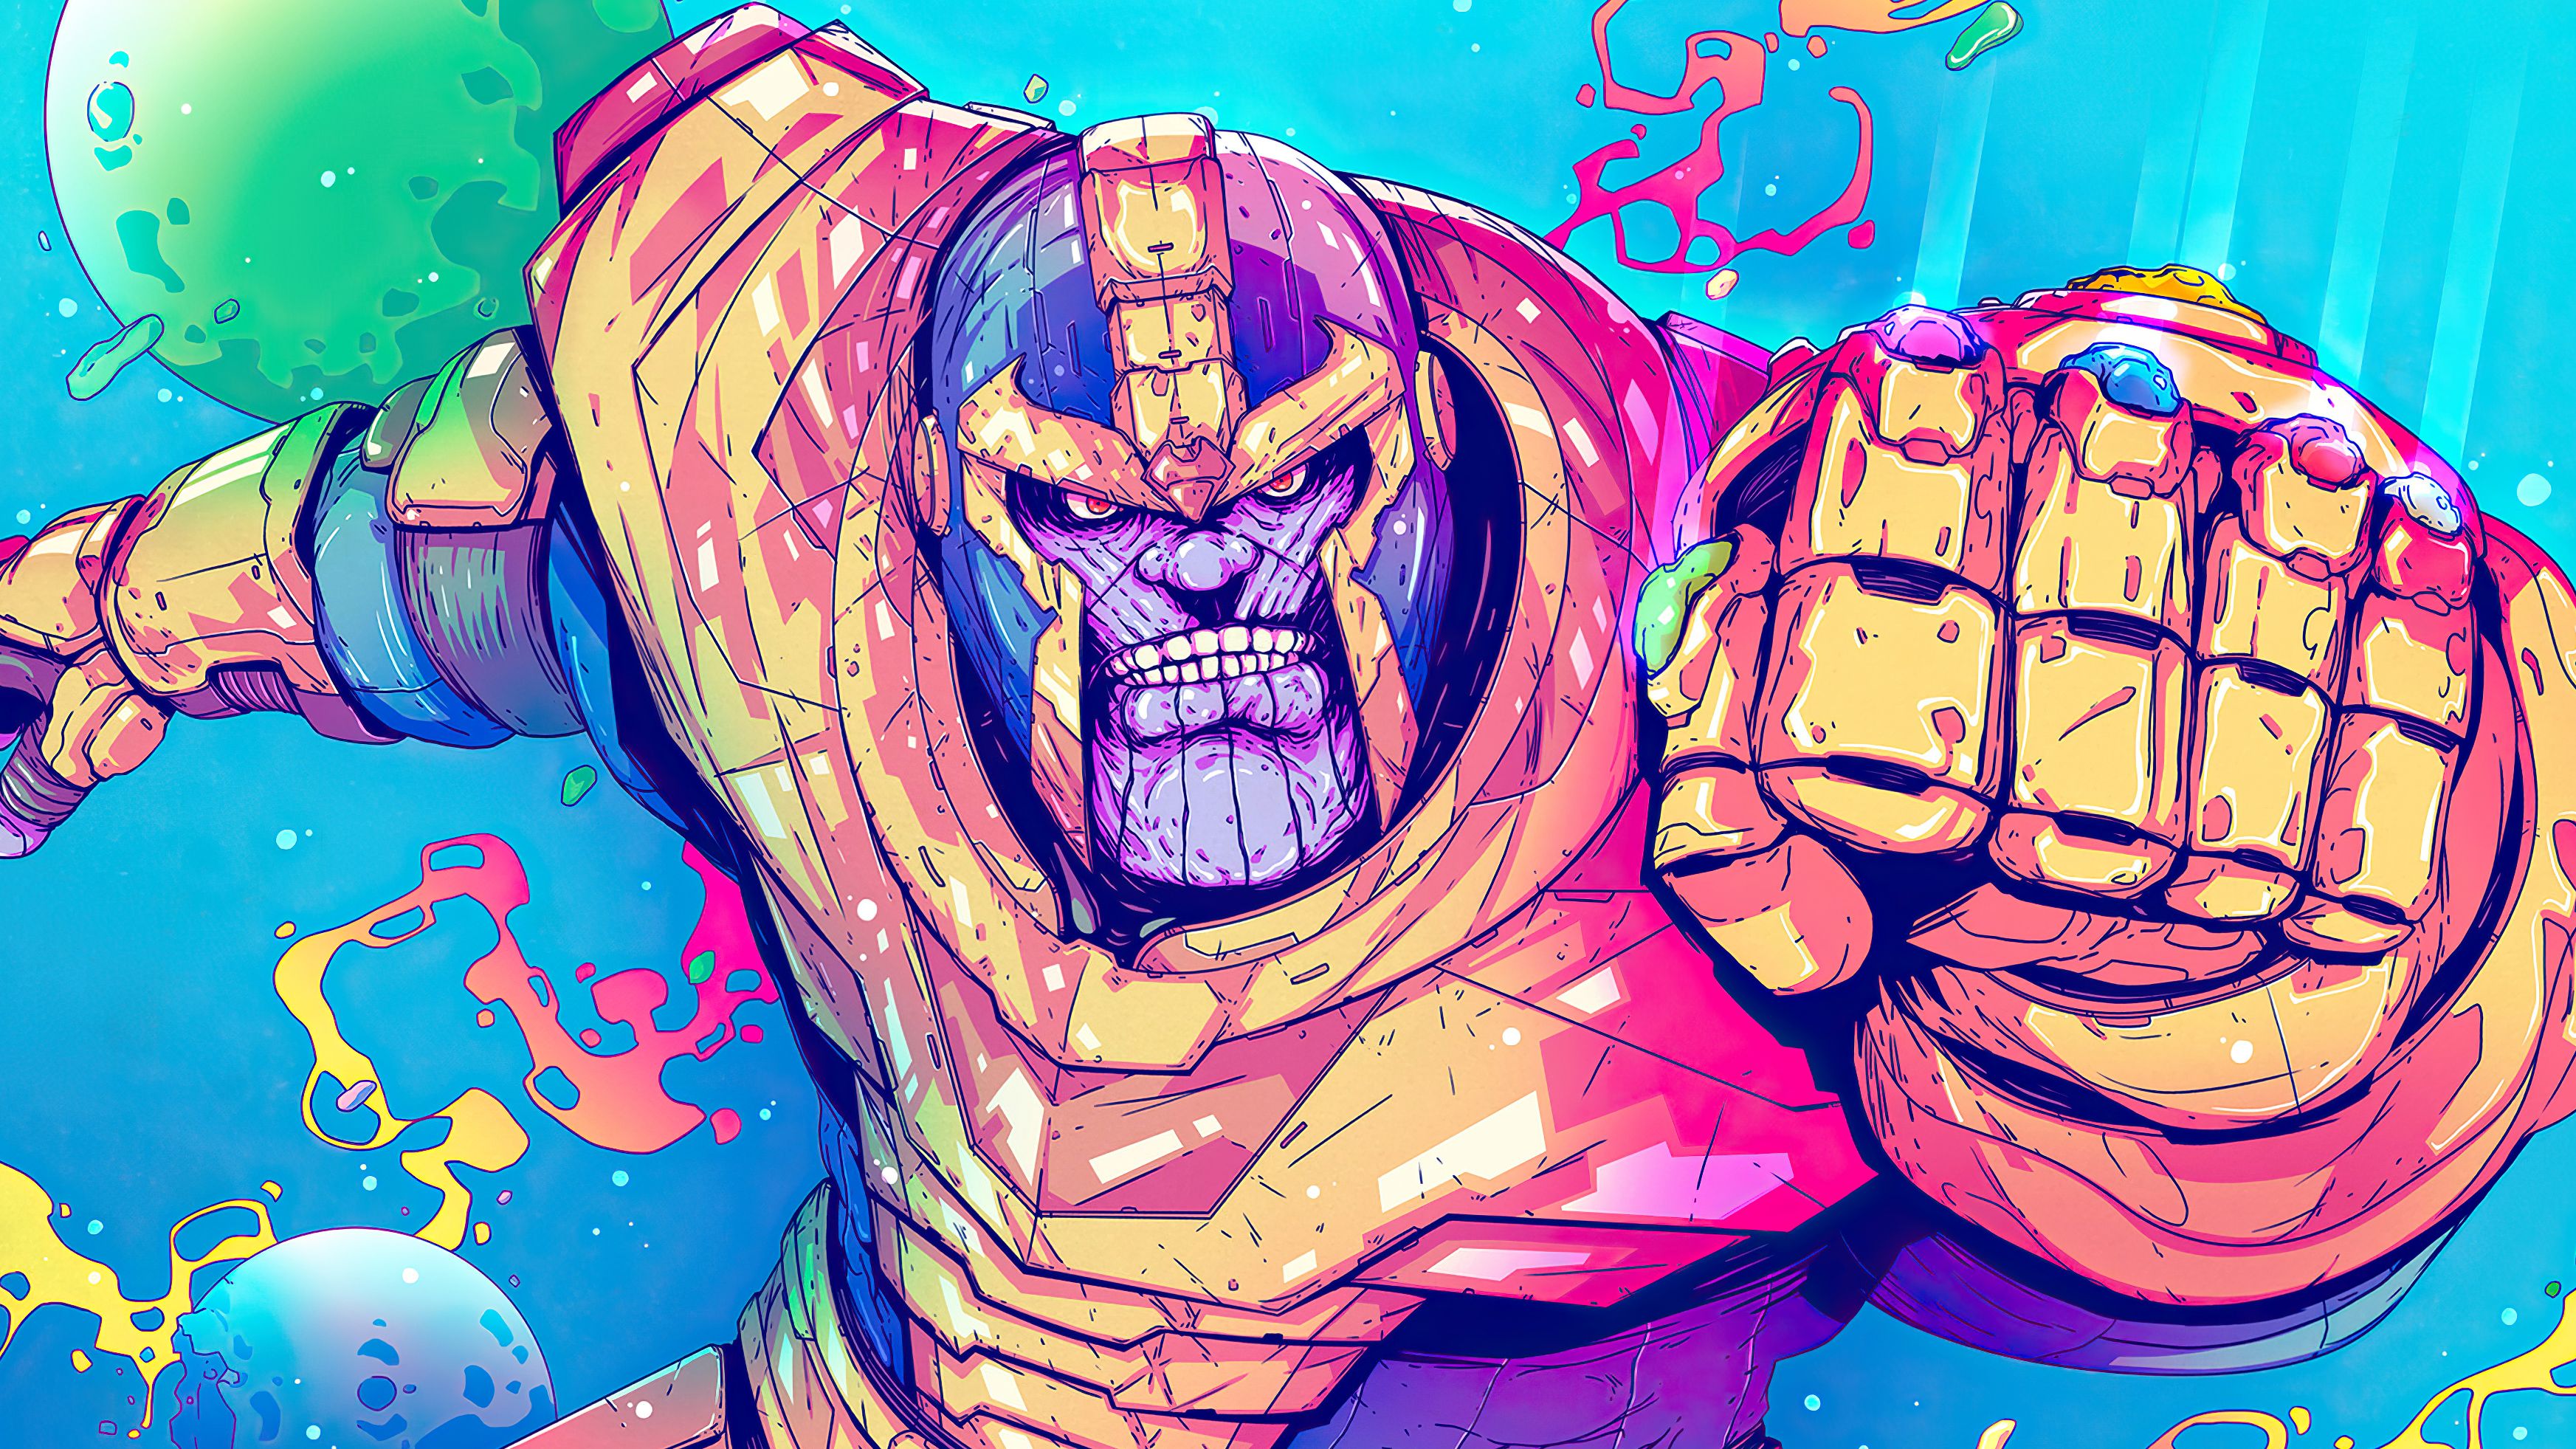 Thanos Sketchy Artwork, HD Superheroes, 4k Wallpaper, Image, Background, Photo and Picture